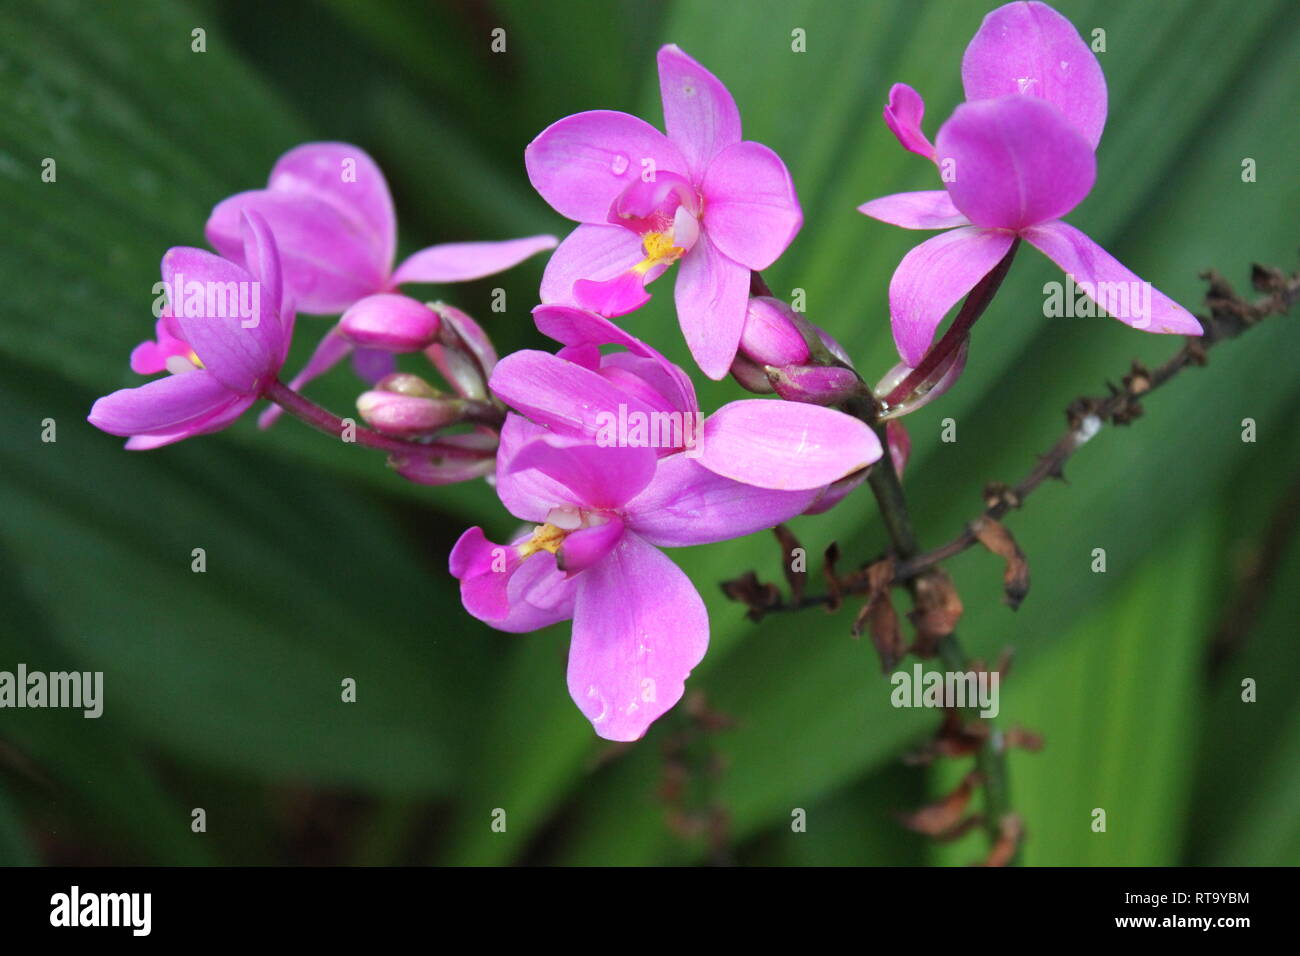 Beautiful cultivated flowering, Orchid, Ground Orchid, Clawed Spathoglottis grapette plant growing in the flower garden. Stock Photo